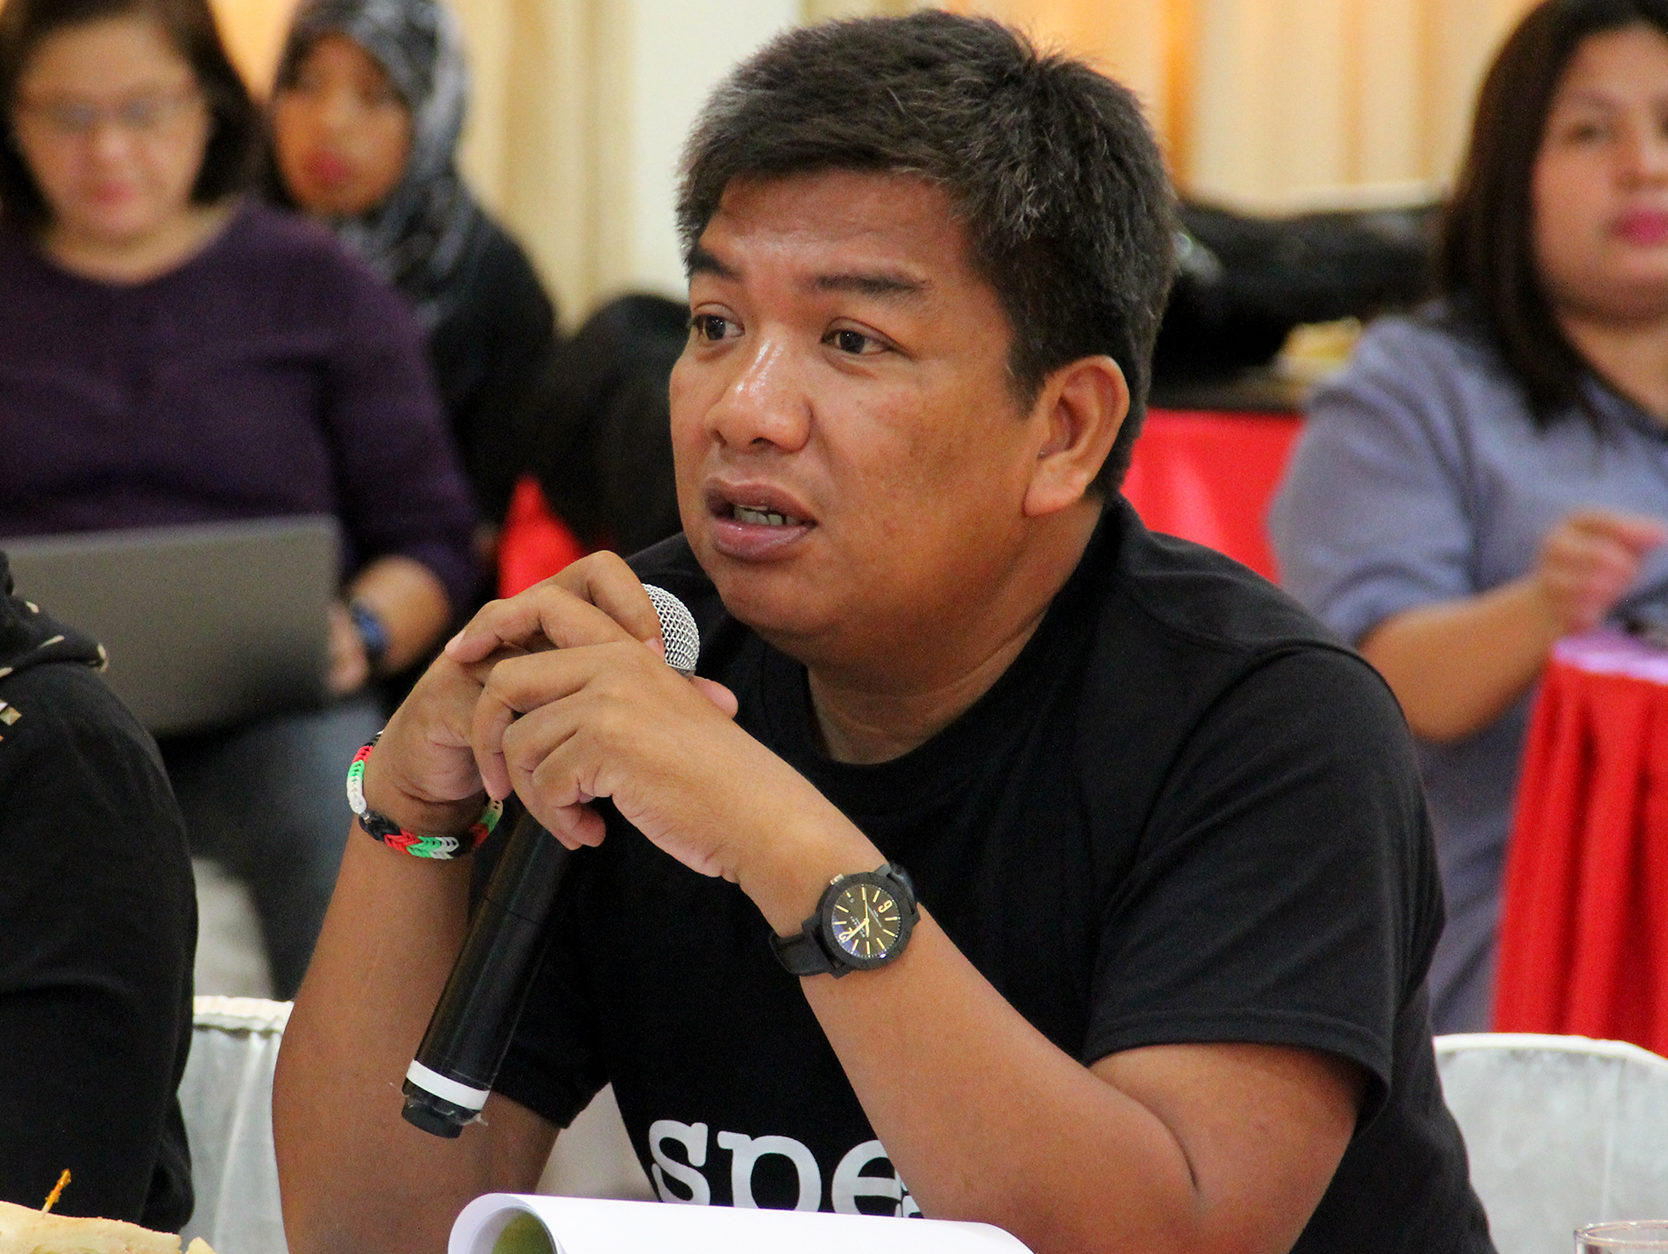 Basilan Rep. Mujiv Hataman has joined calls for a congressional inquiry into the fire that struck MV Lady Mary Joy 3 last March 29, off the waters of Basilan that claimed the lives of 31 passengers.